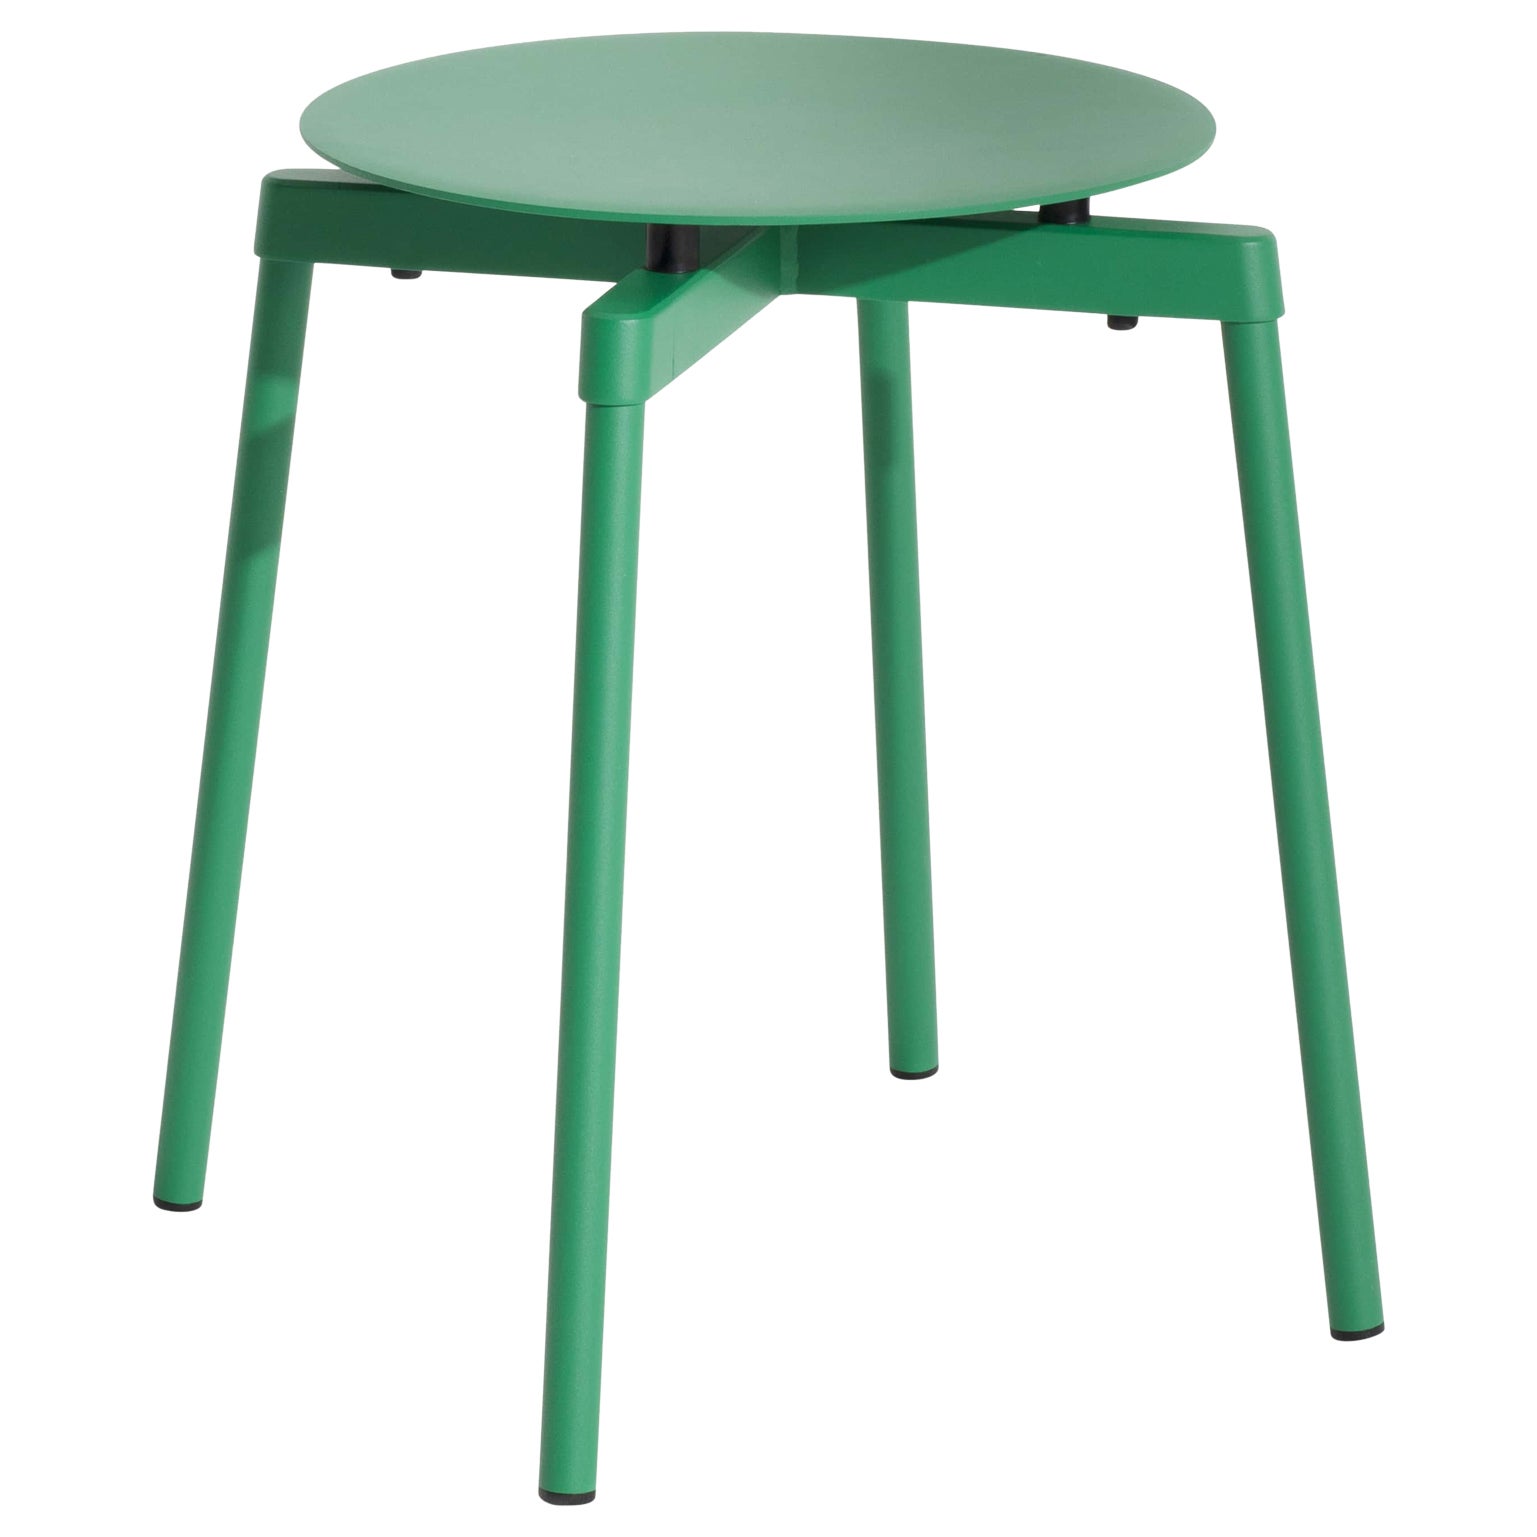 Petite Friture Fromme Stool in Mint-Green Aluminium by Tom Chung, 2020 For Sale